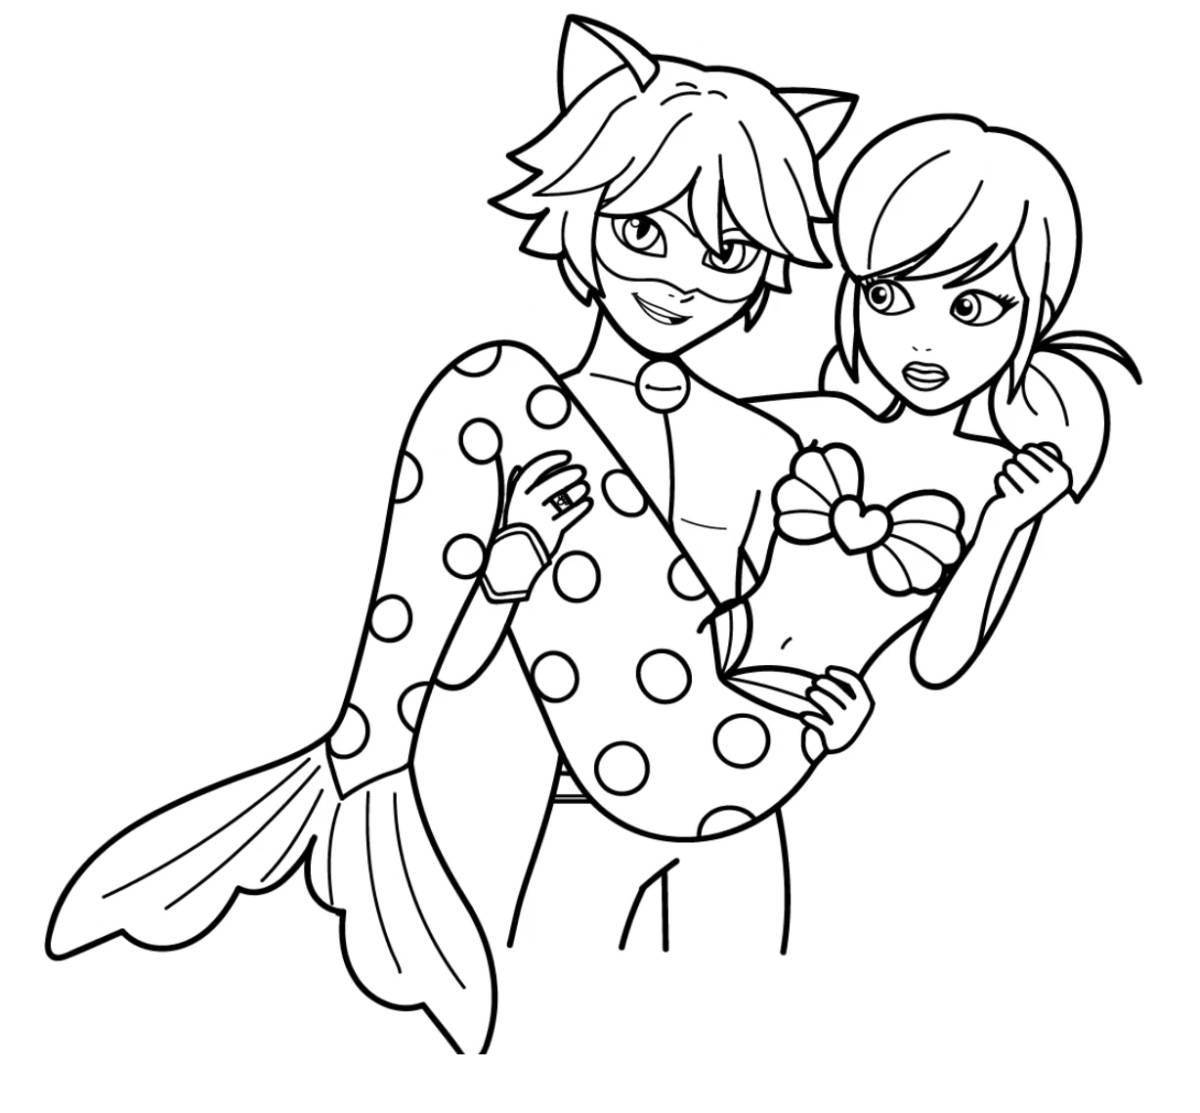 Coloring page gorgeous ladybug and marinette